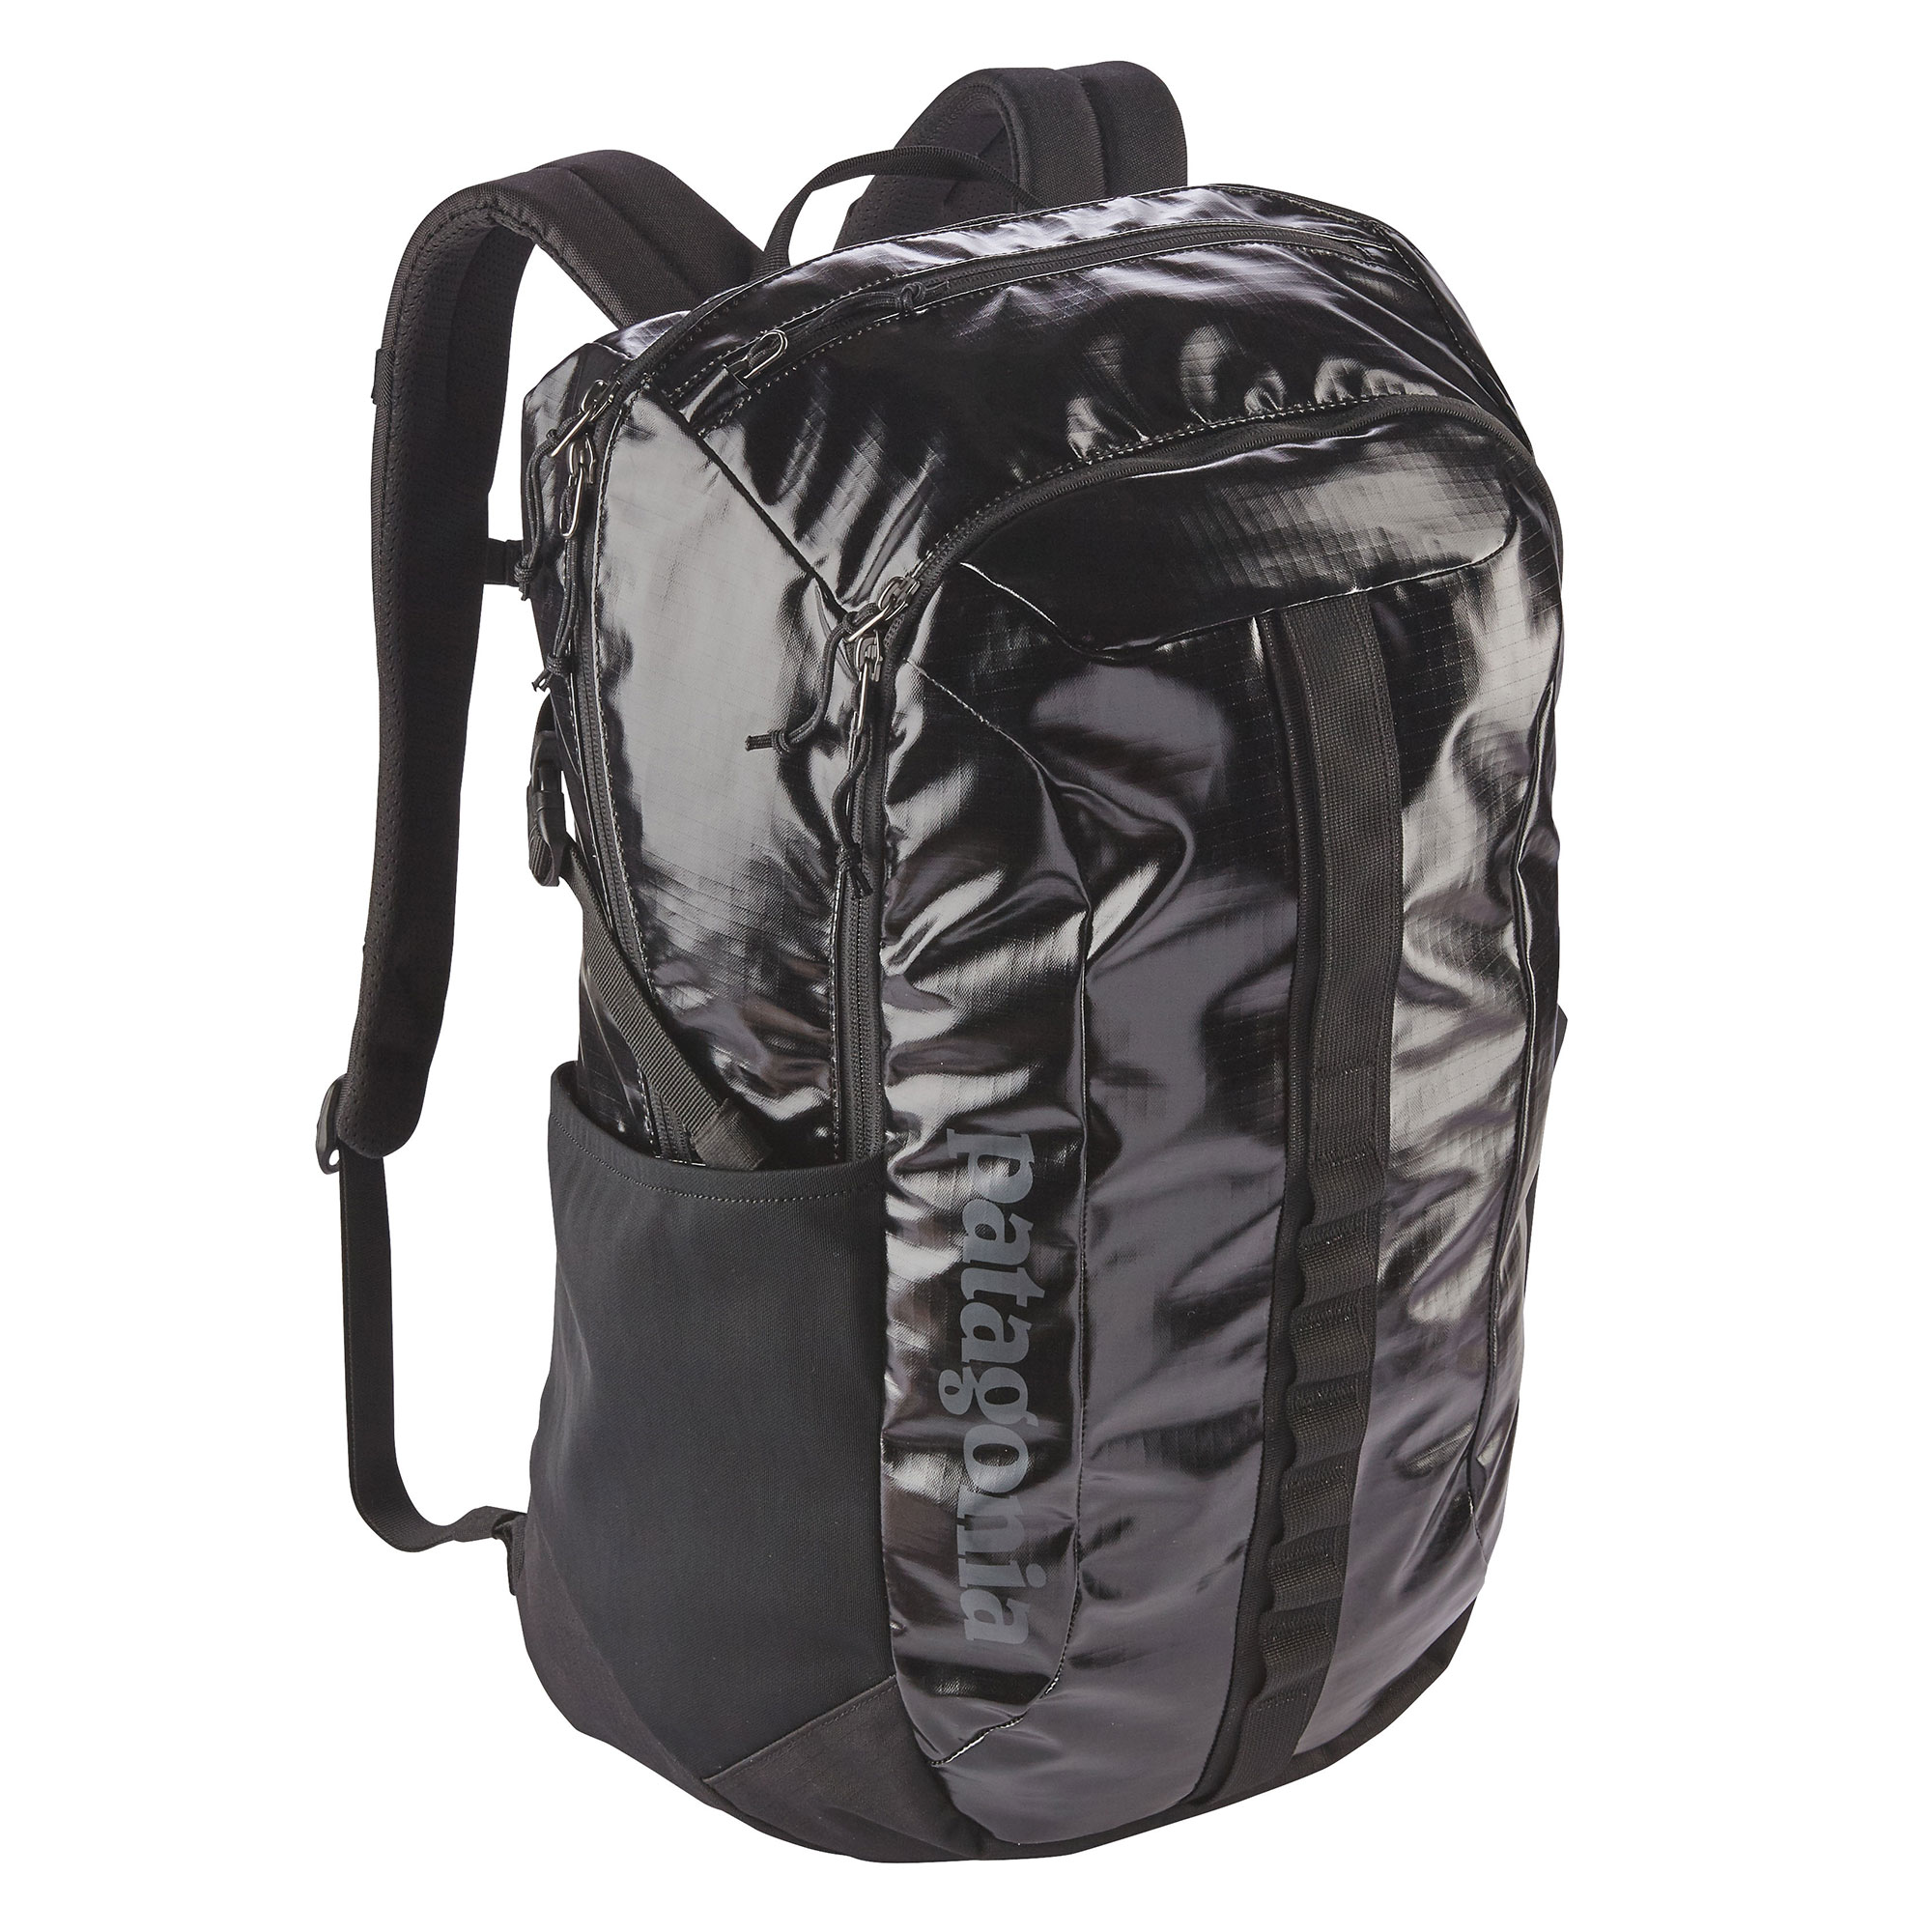 Patagonia Black Hole 30L Backpack - InTheSnow